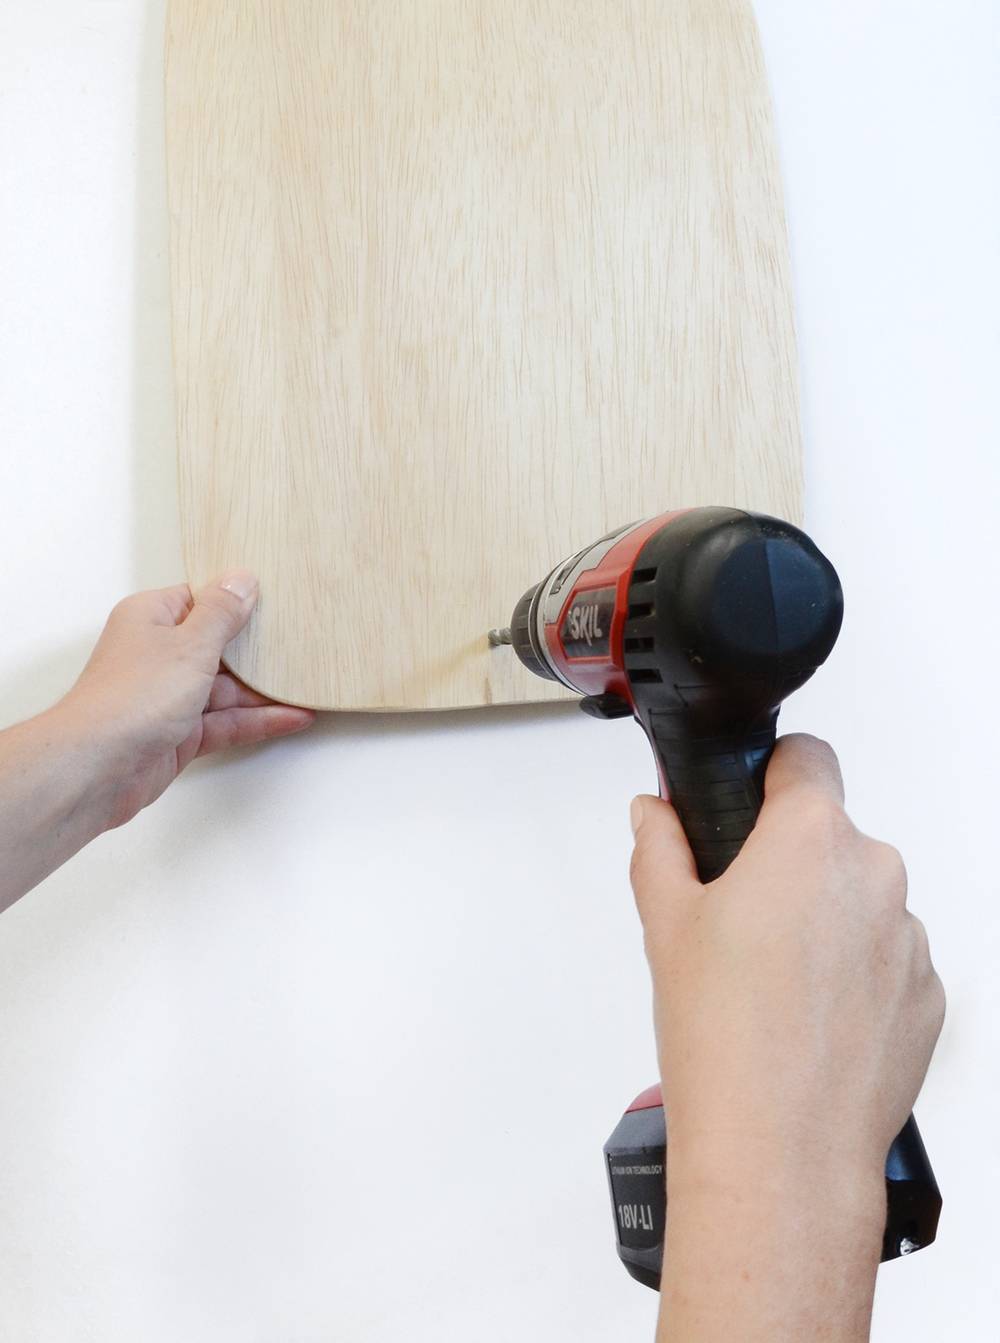 A hand holding a piece of light colored wood while another hand is using a hand drill.